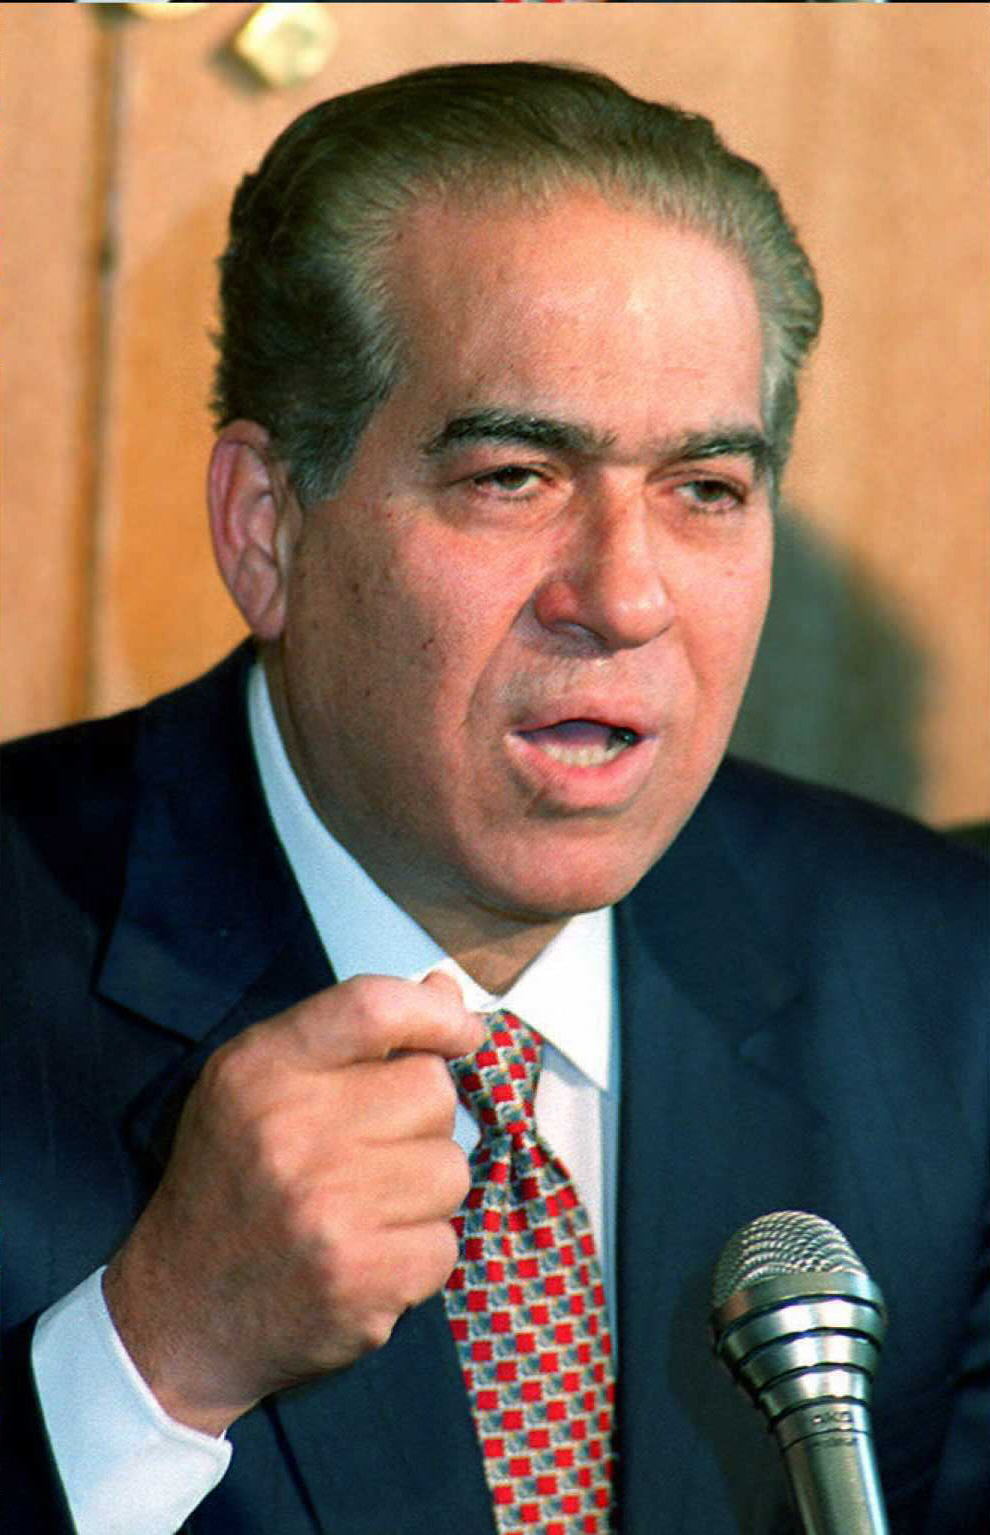 (FILES) -- File picture dated January 6, 1996 shows Egypt's former premier Kamal al-Ganzuri speaking at a press conference in Cairo. Egypt's ruling military council tasked on November 24, 2011 Ganzuri, who headed the government from 1996 to 1999 under ousted president Hosni Mubarak, with forming a new cabinet, accordingn nto private Egyptian TV channels. AFP PHOTO/FILES